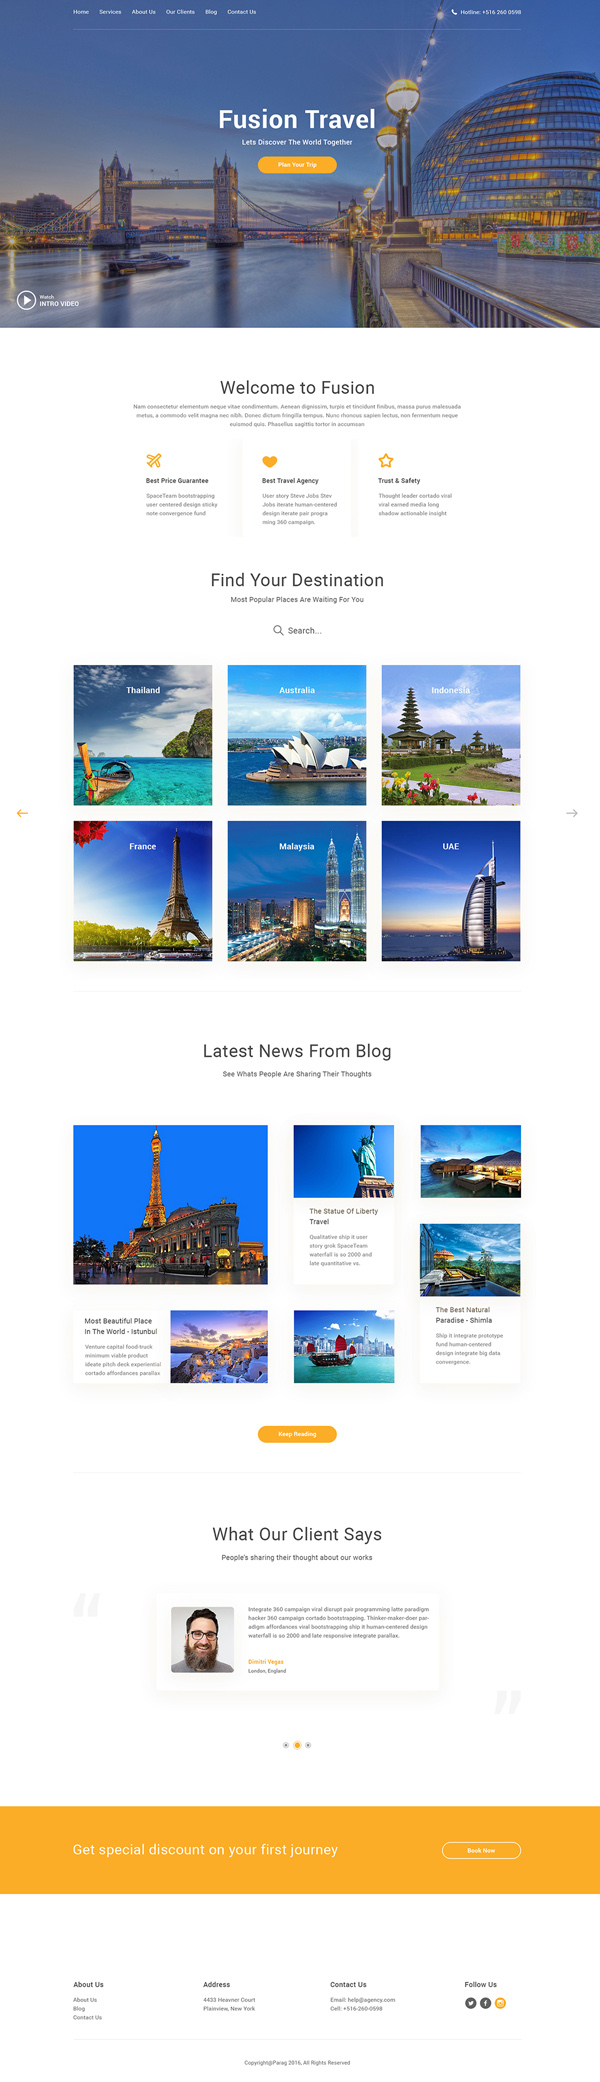 Fusion: Travel Agency Free Web Template